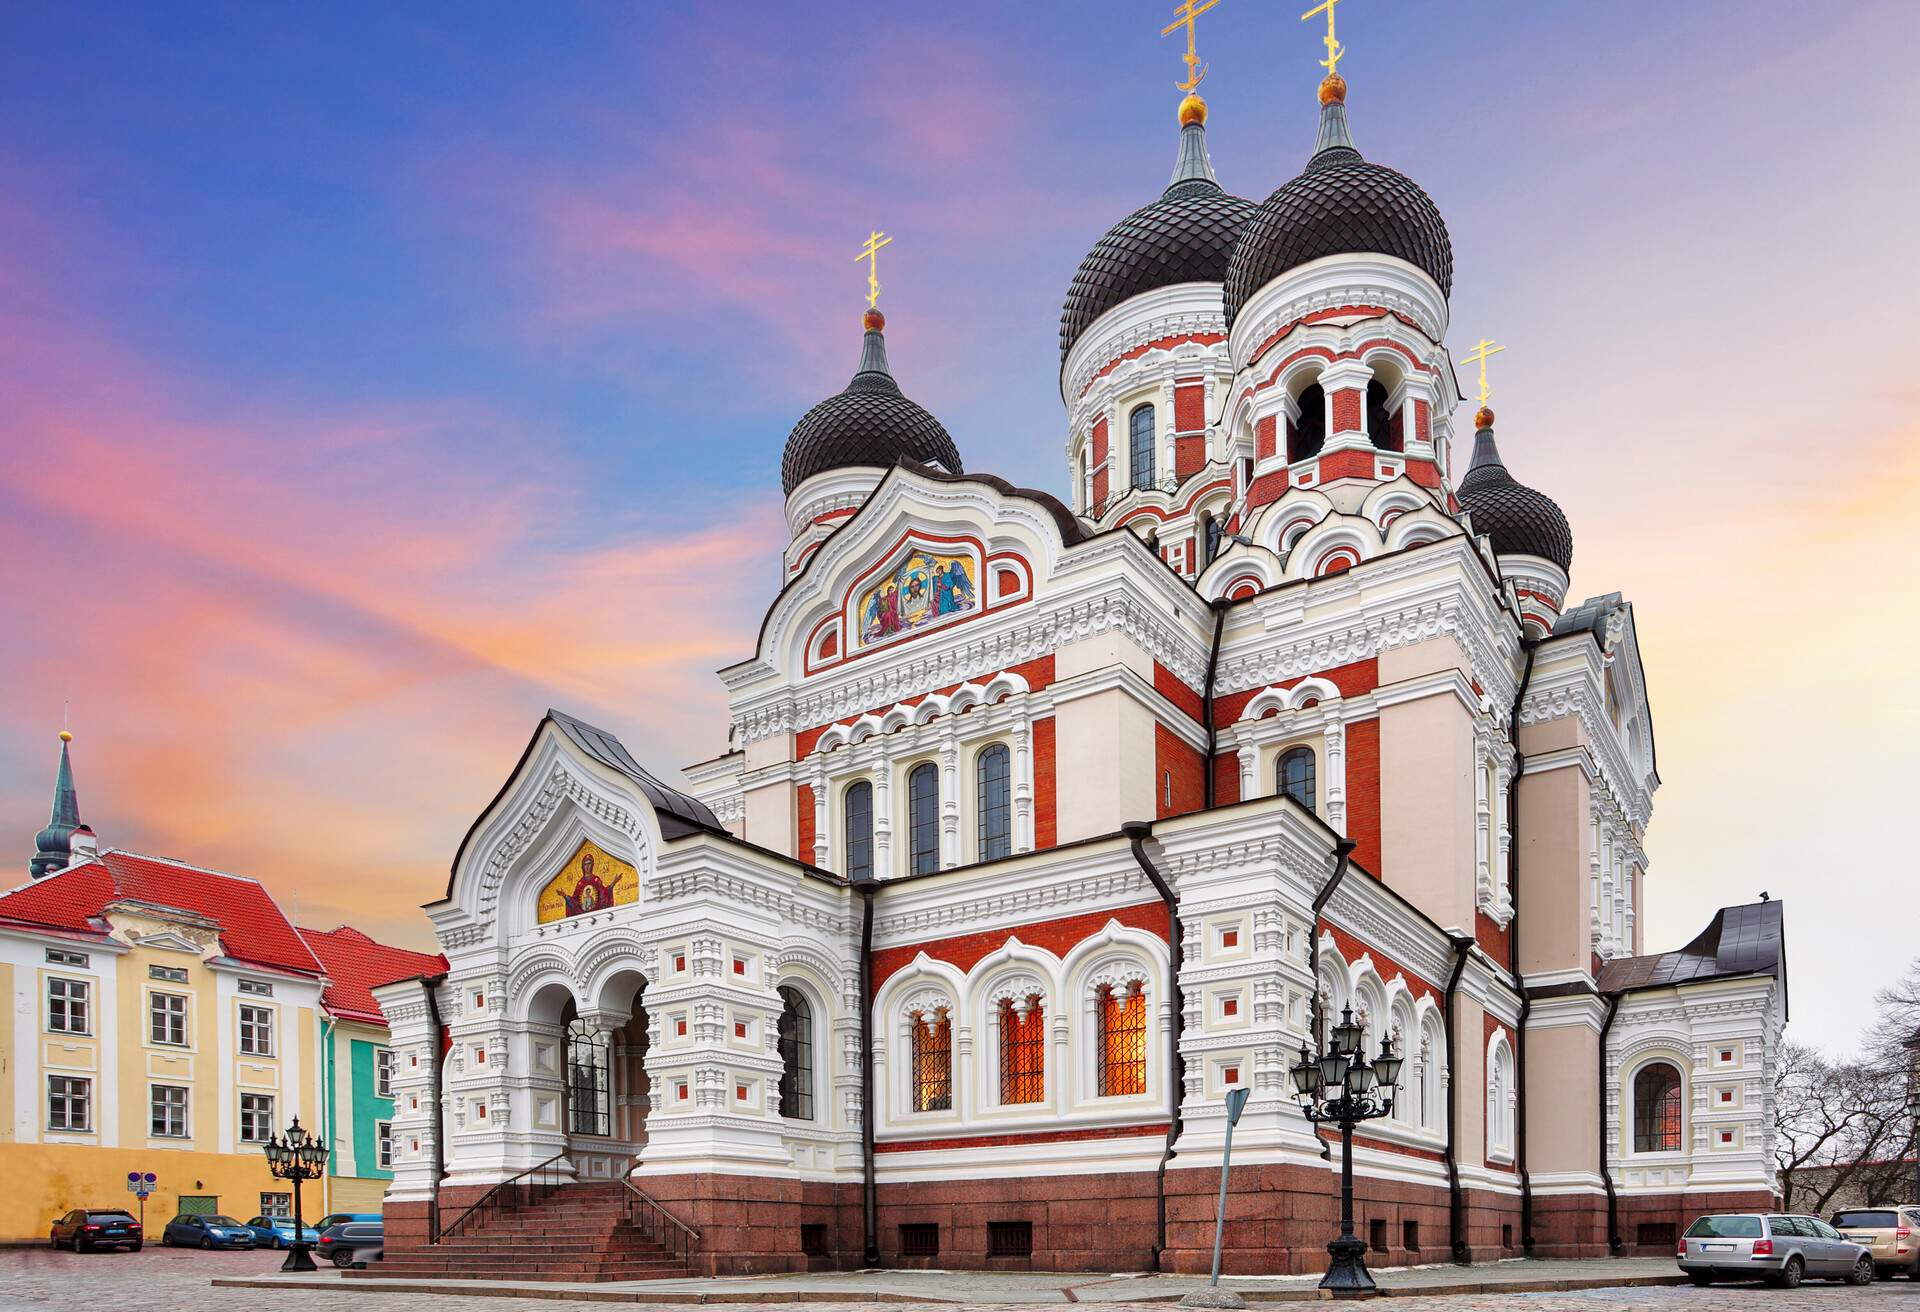 DEST_ESTONIA_TALLINN_NEVSKY-ORTHODOX-CATHEDRAL_GettyImages-646366932